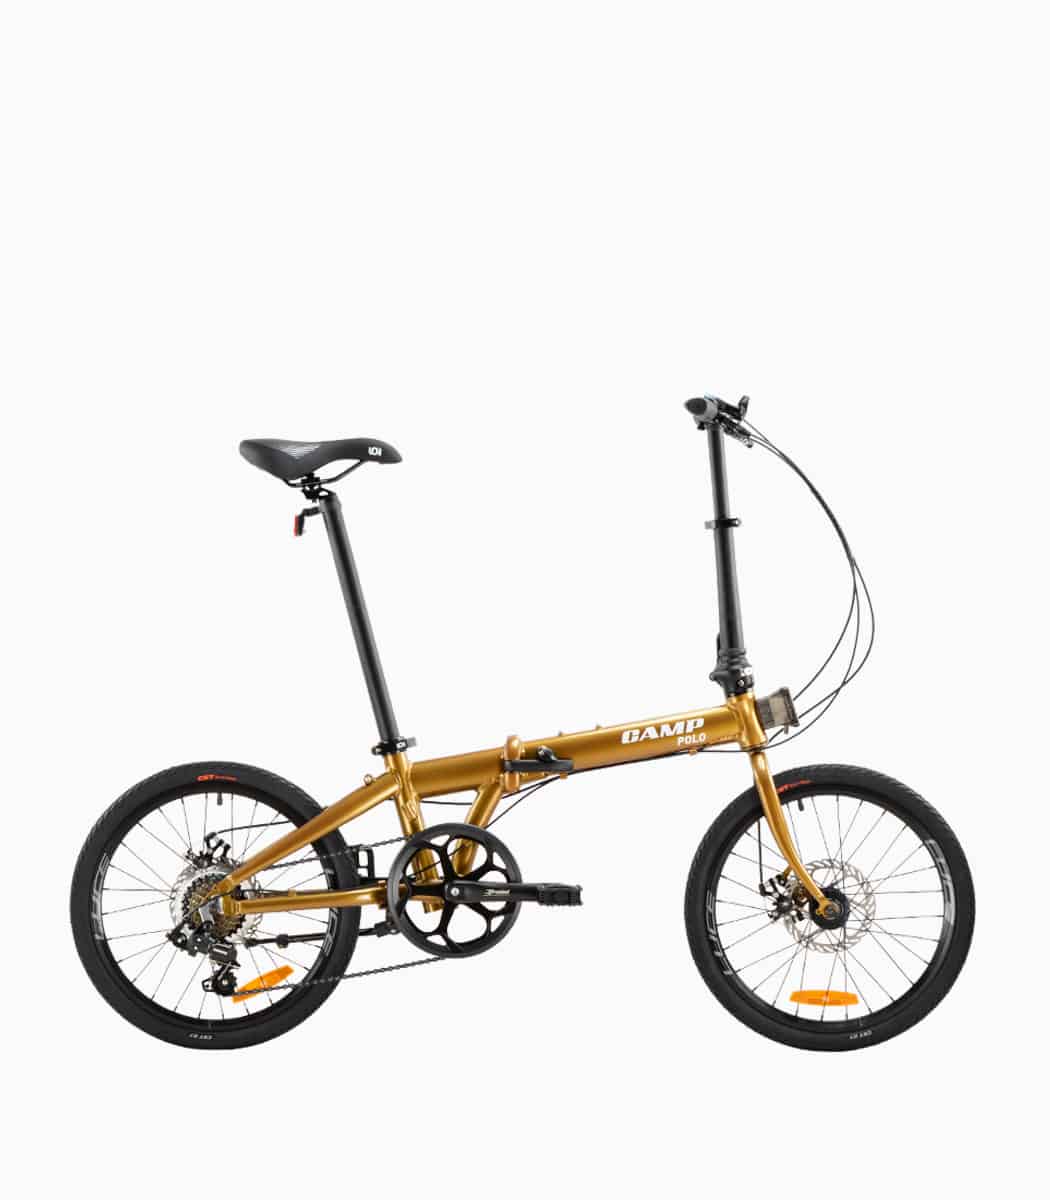 CAMP Polo (ESPRESSO) foldable bicycle right